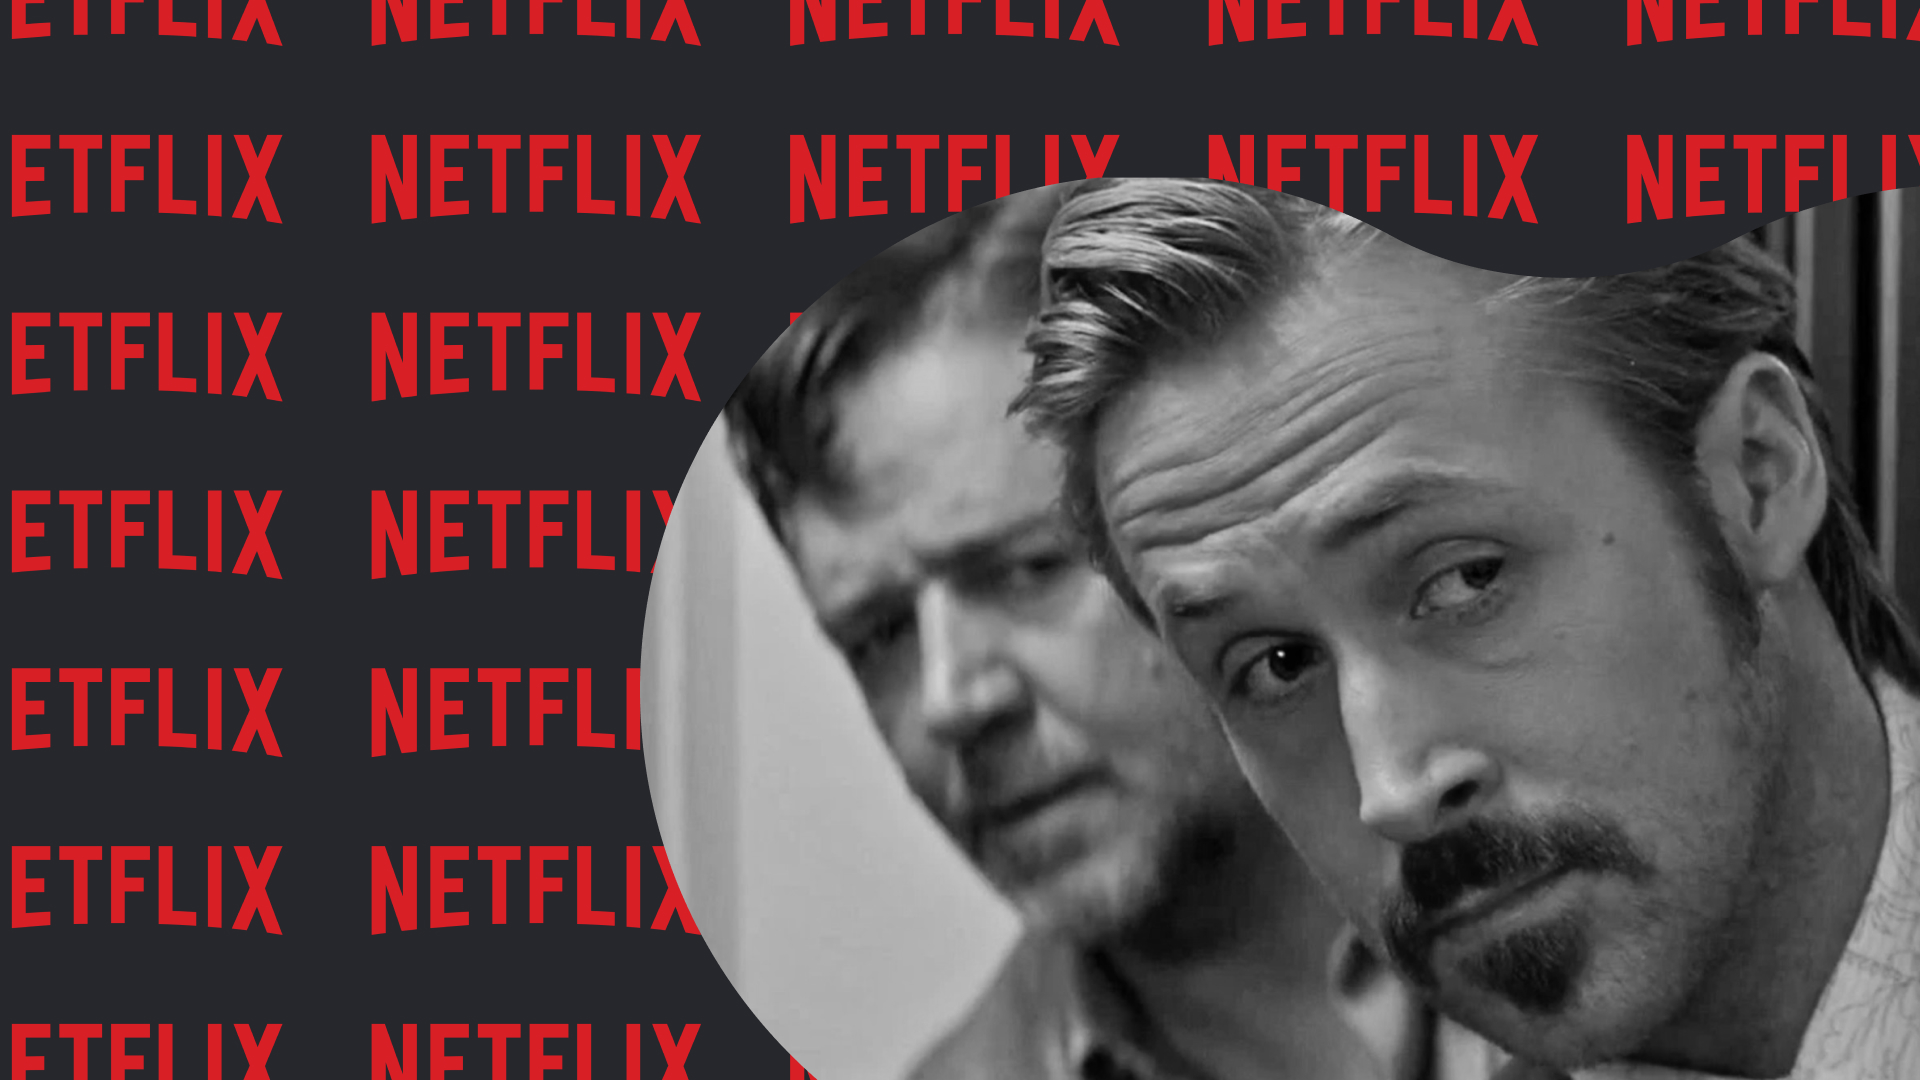 50 Best Comedy Movies On Netflix  Funny Movies On Netflix To Watch